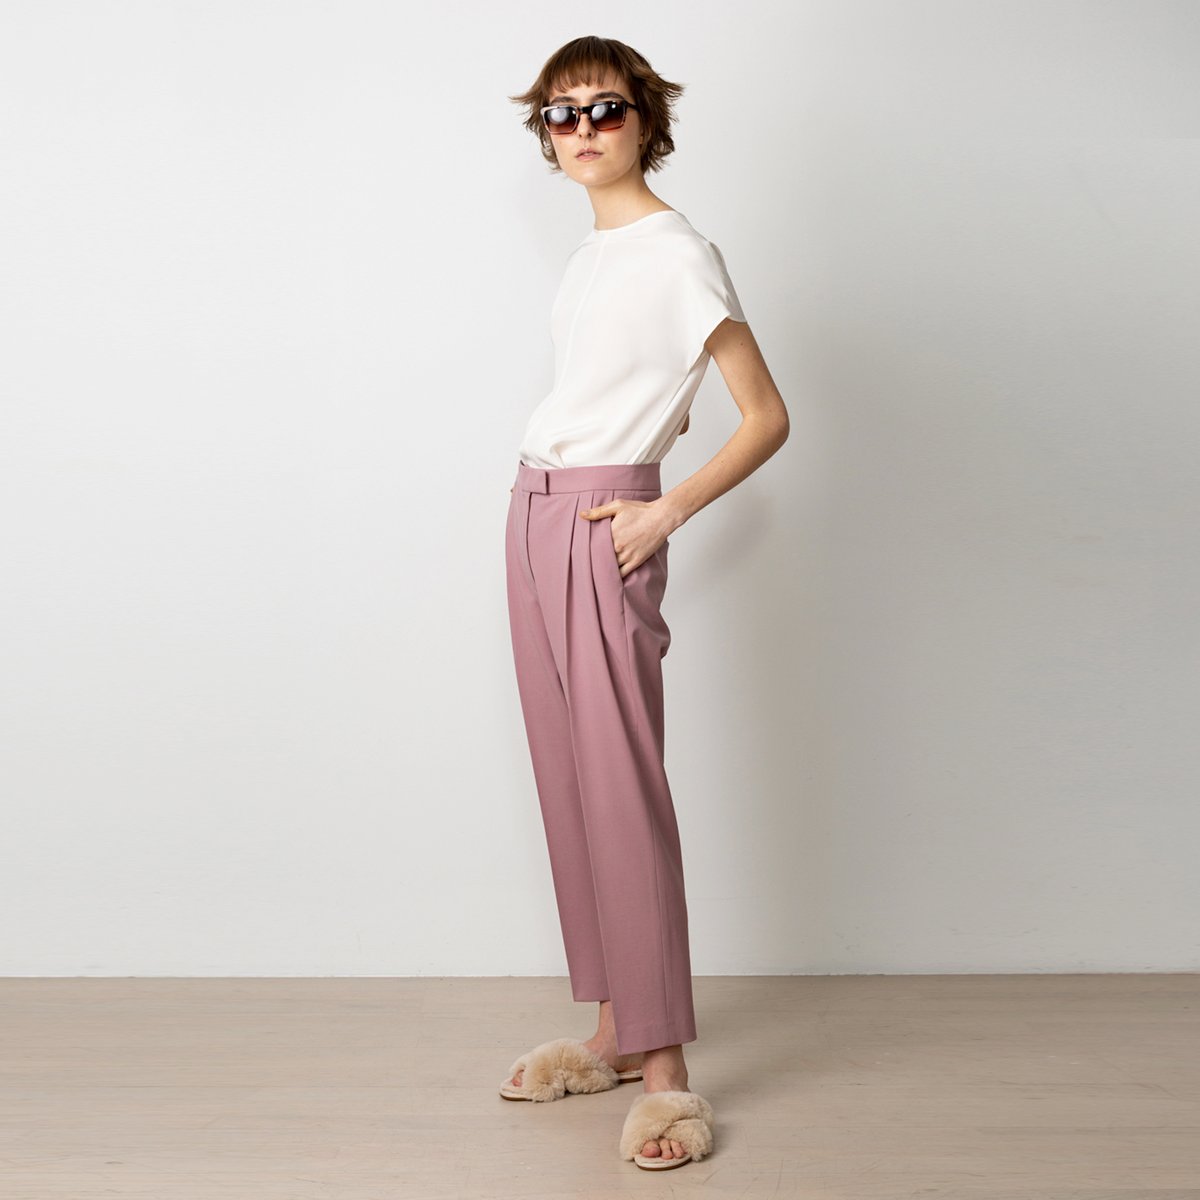 Chic Office Pants - Grey Trouser Pants - High Waisted Pants - Lulus